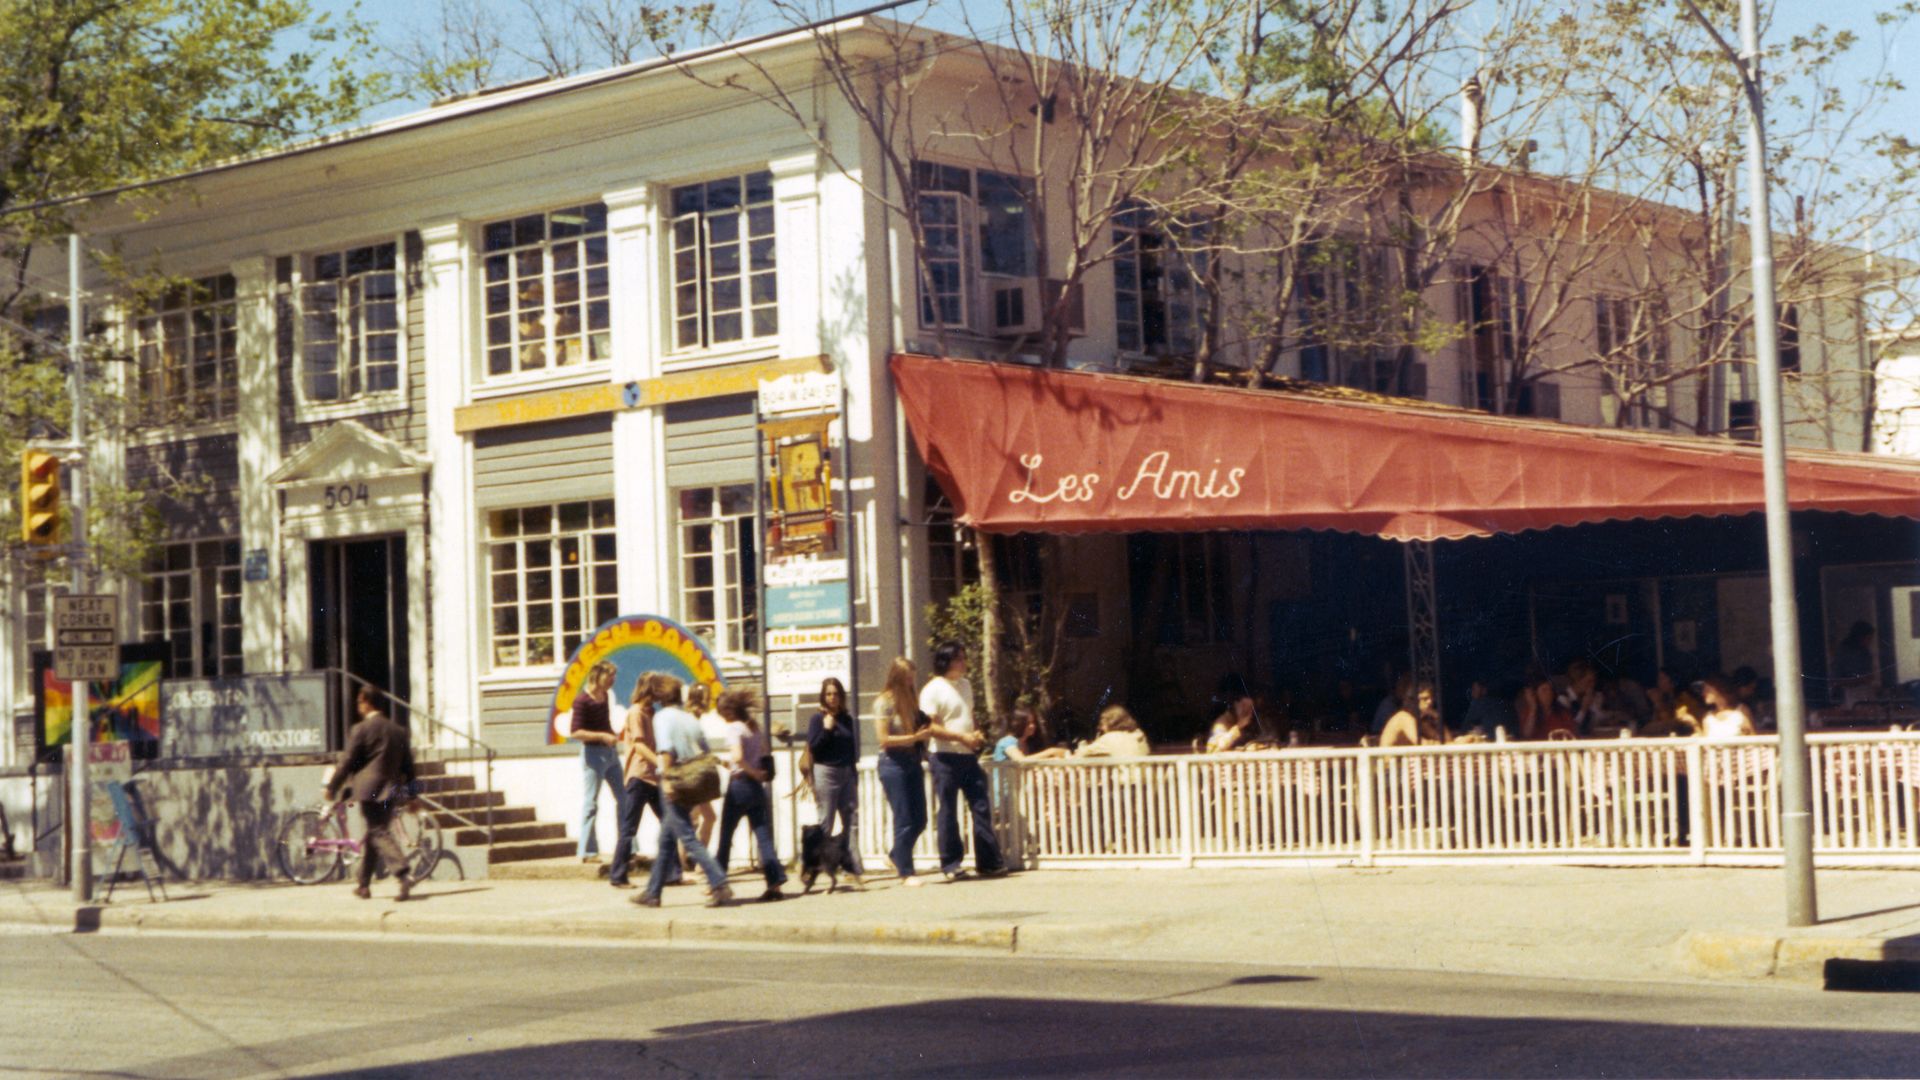 The exterior of Les Amis